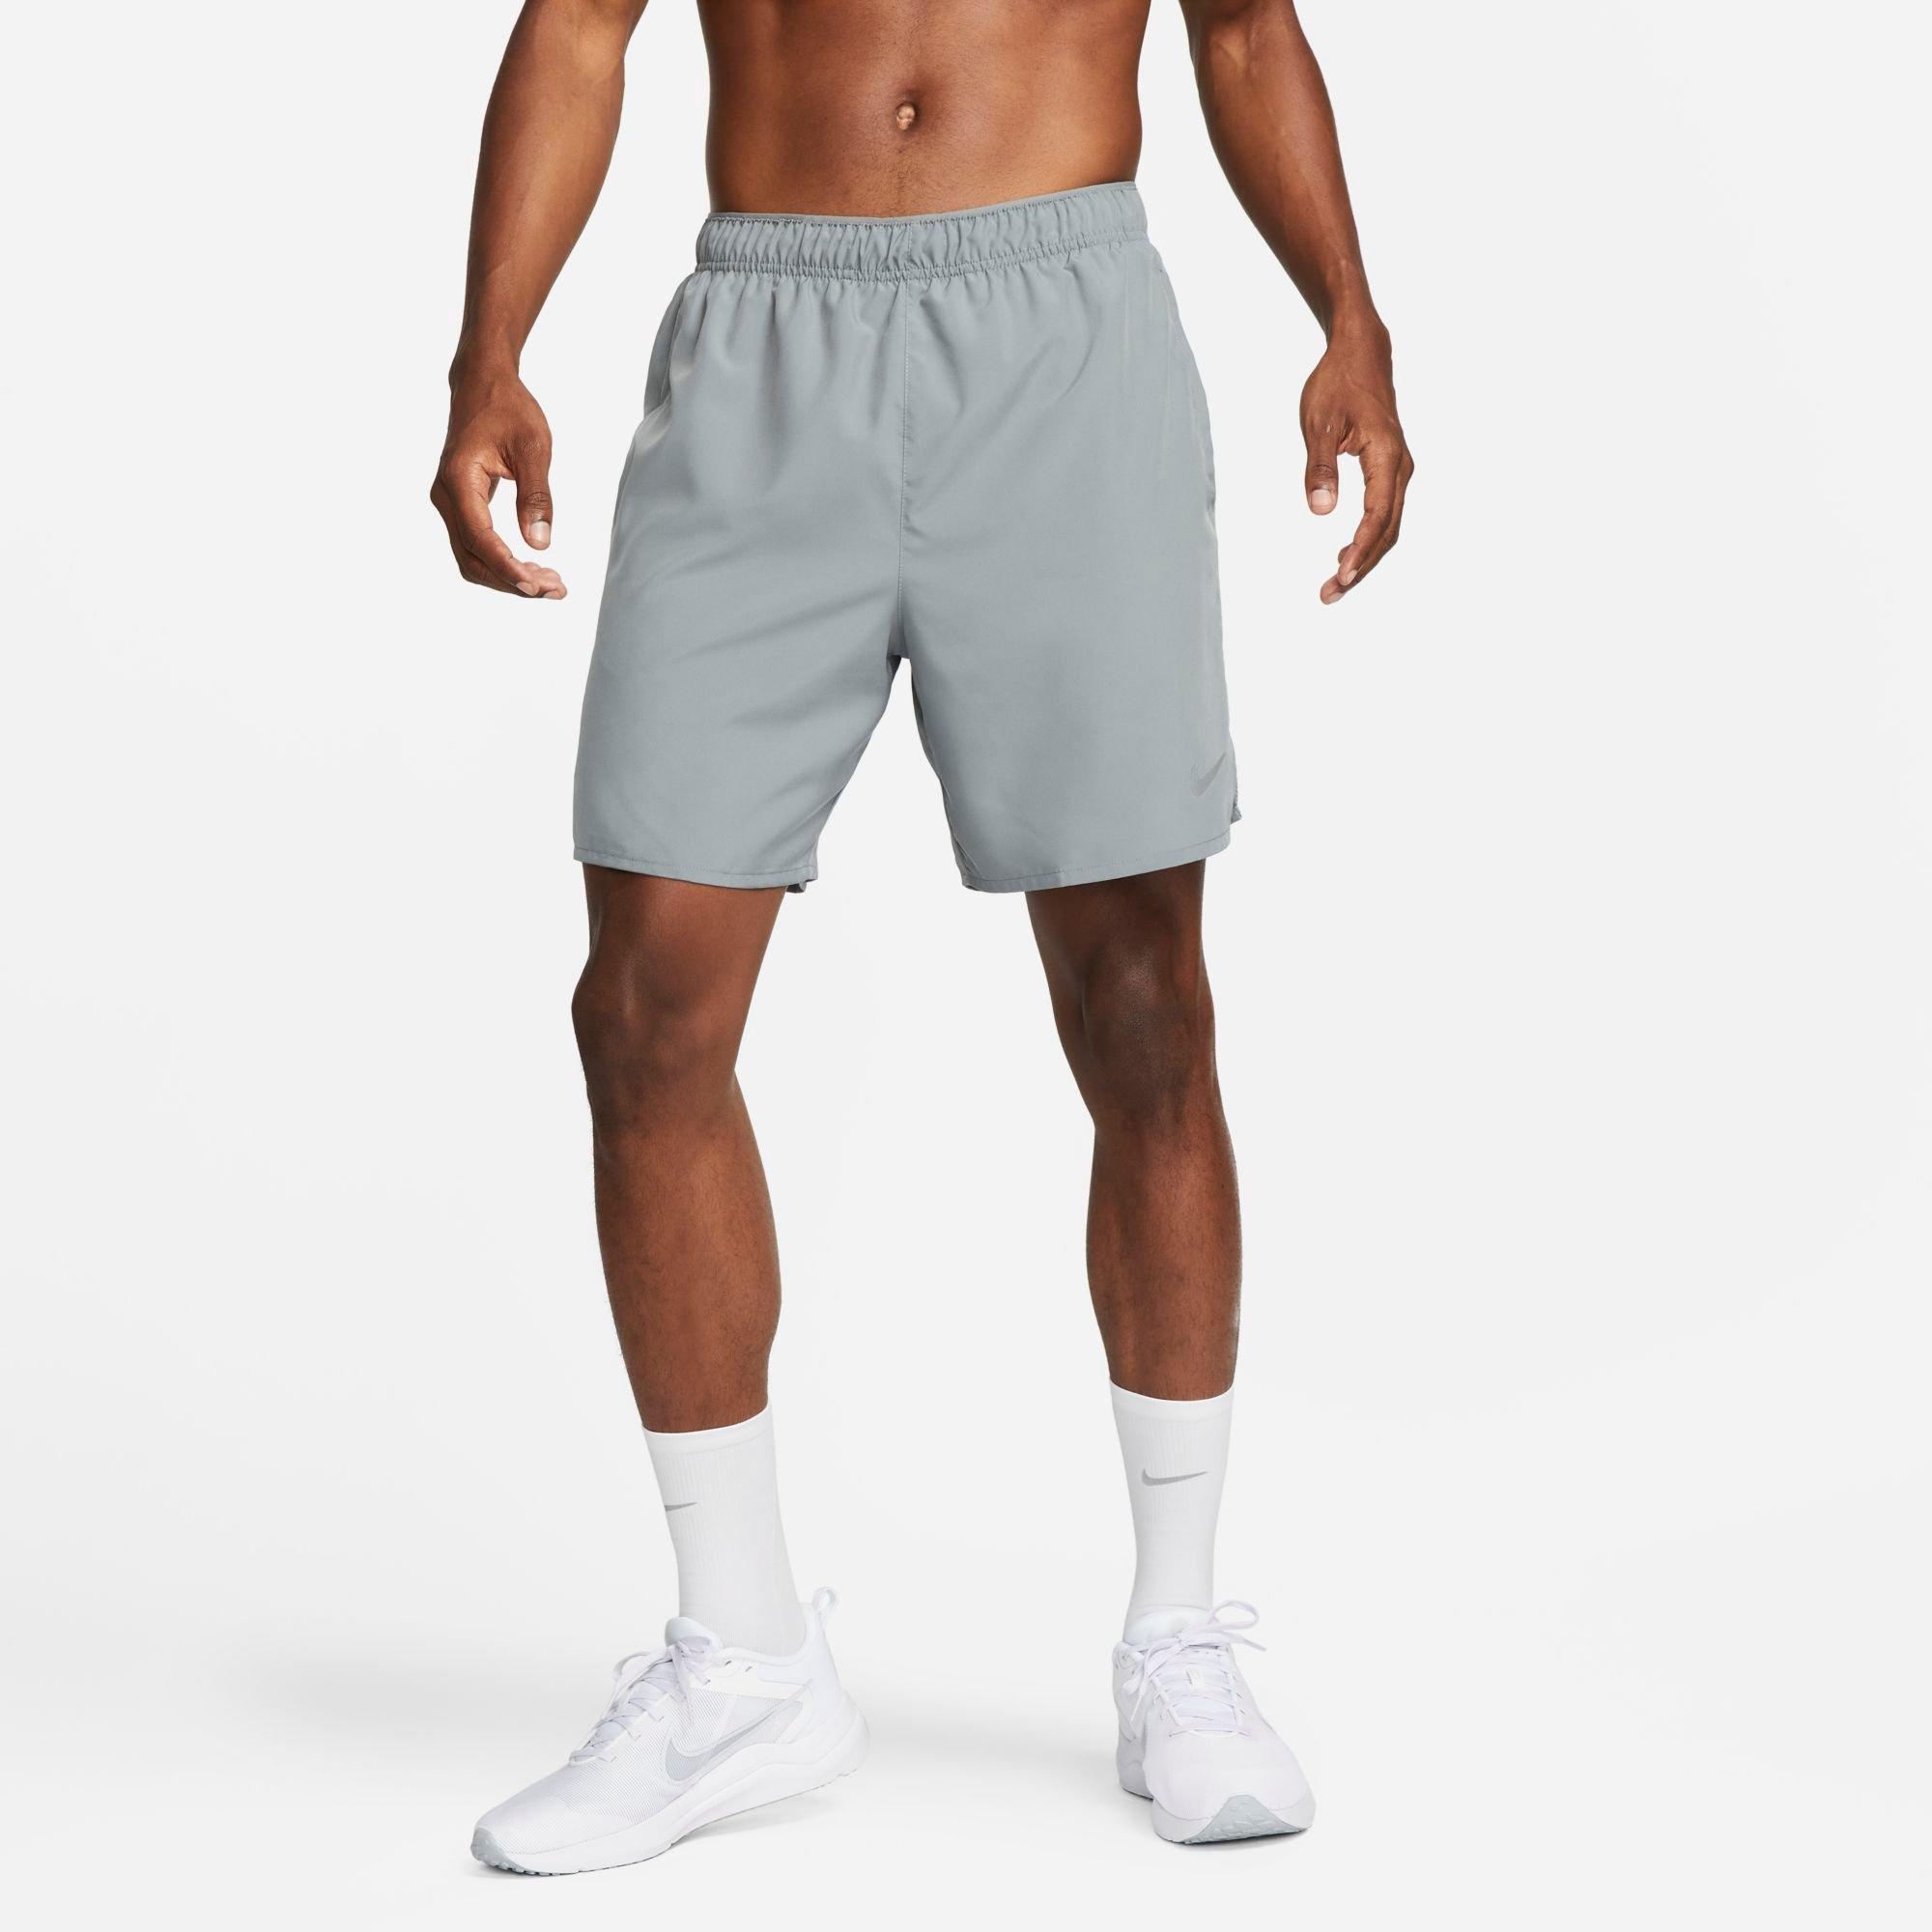 NIKE NIKE MEN'S DRI-FIT CHALLENGER BRIEF-LINED 7" RUNNING SHORTS